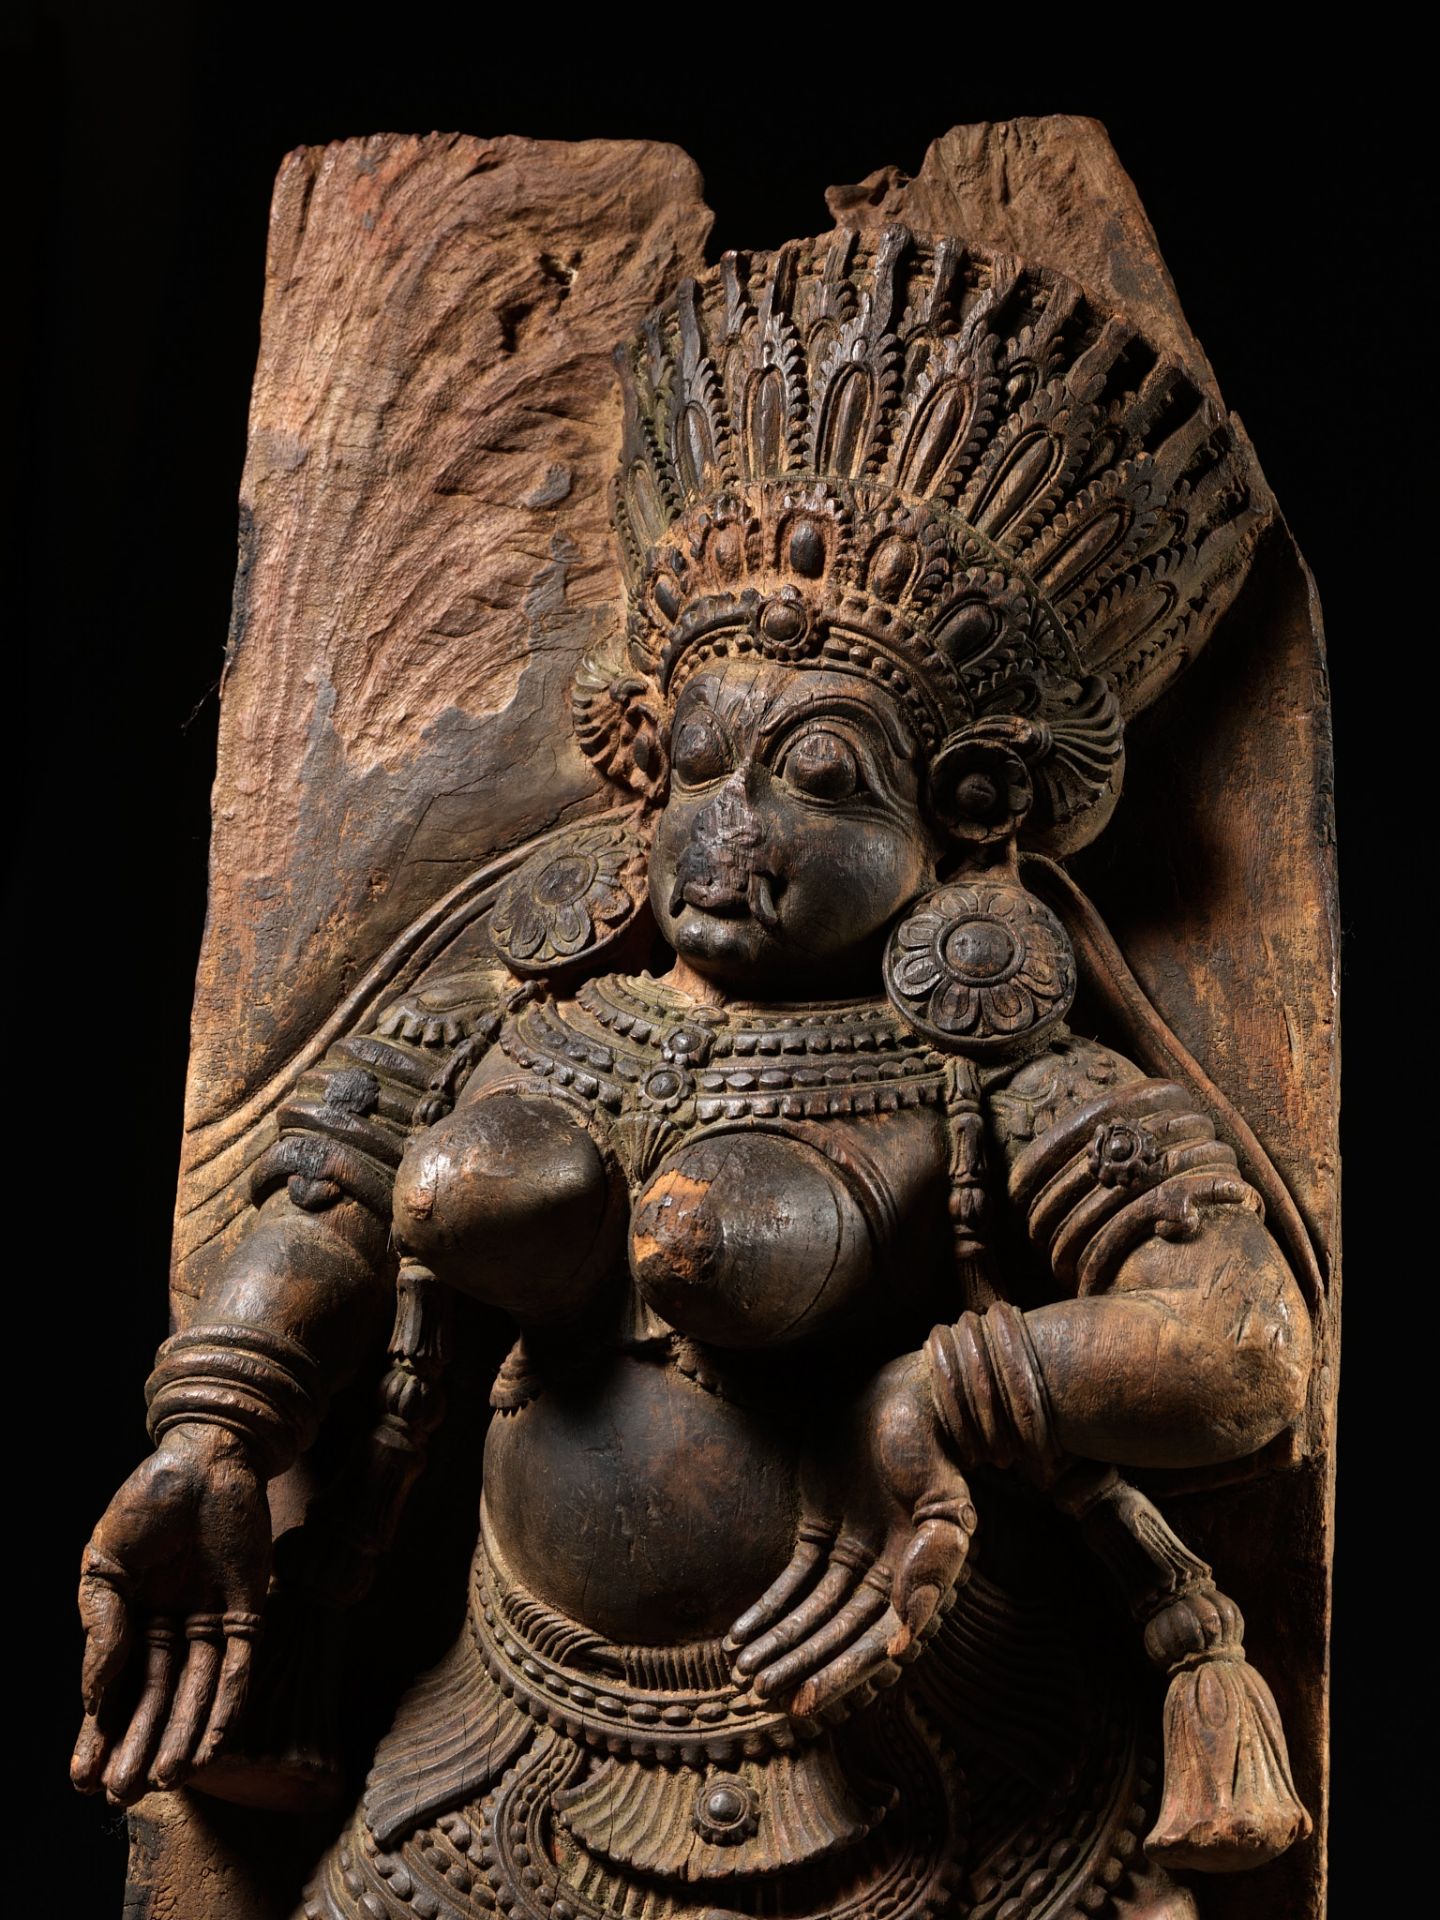 A LARGE AND HIGHLY IMPRESSIVE WOOD RELIEF OF A DANCING FEMALE DEMON, KERALA, SOUTH INDIA, 17TH CT